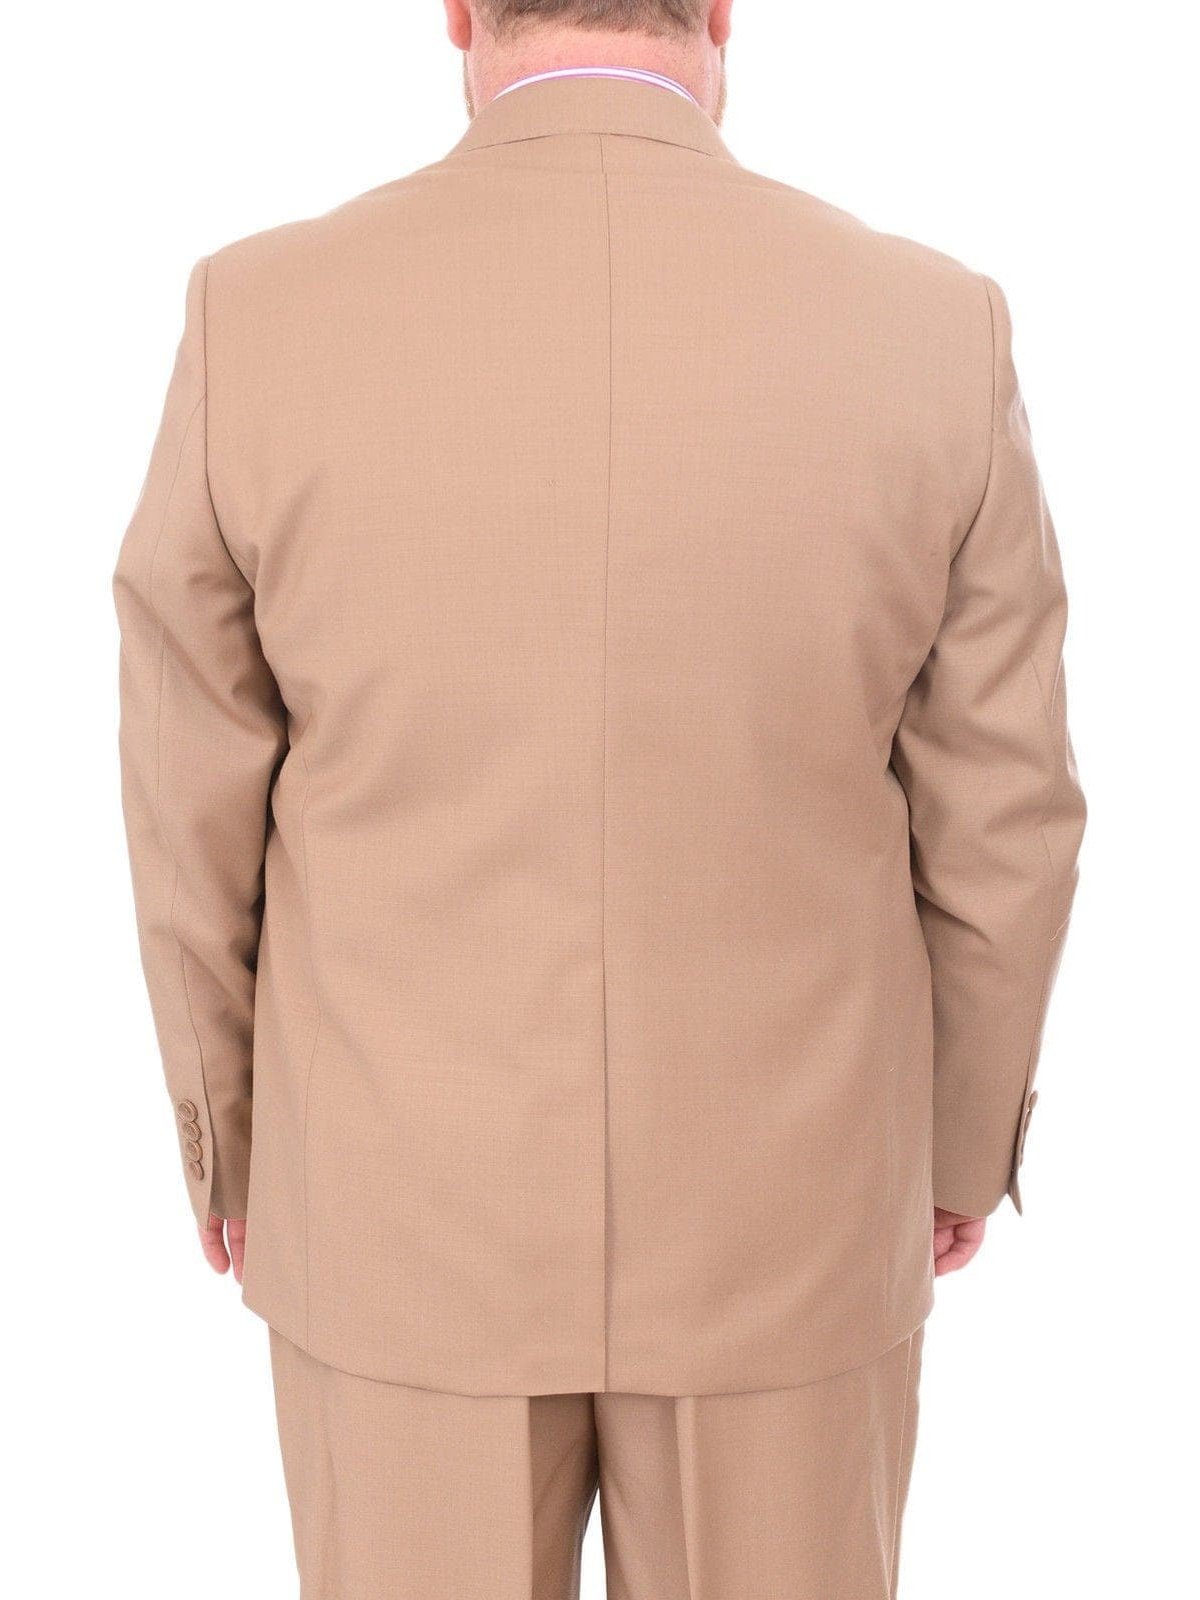 Label M TWO PIECE SUITS Men's Portly Executive Fit Solid Tan Light Brown Two Button 2 Piece Wool Suit